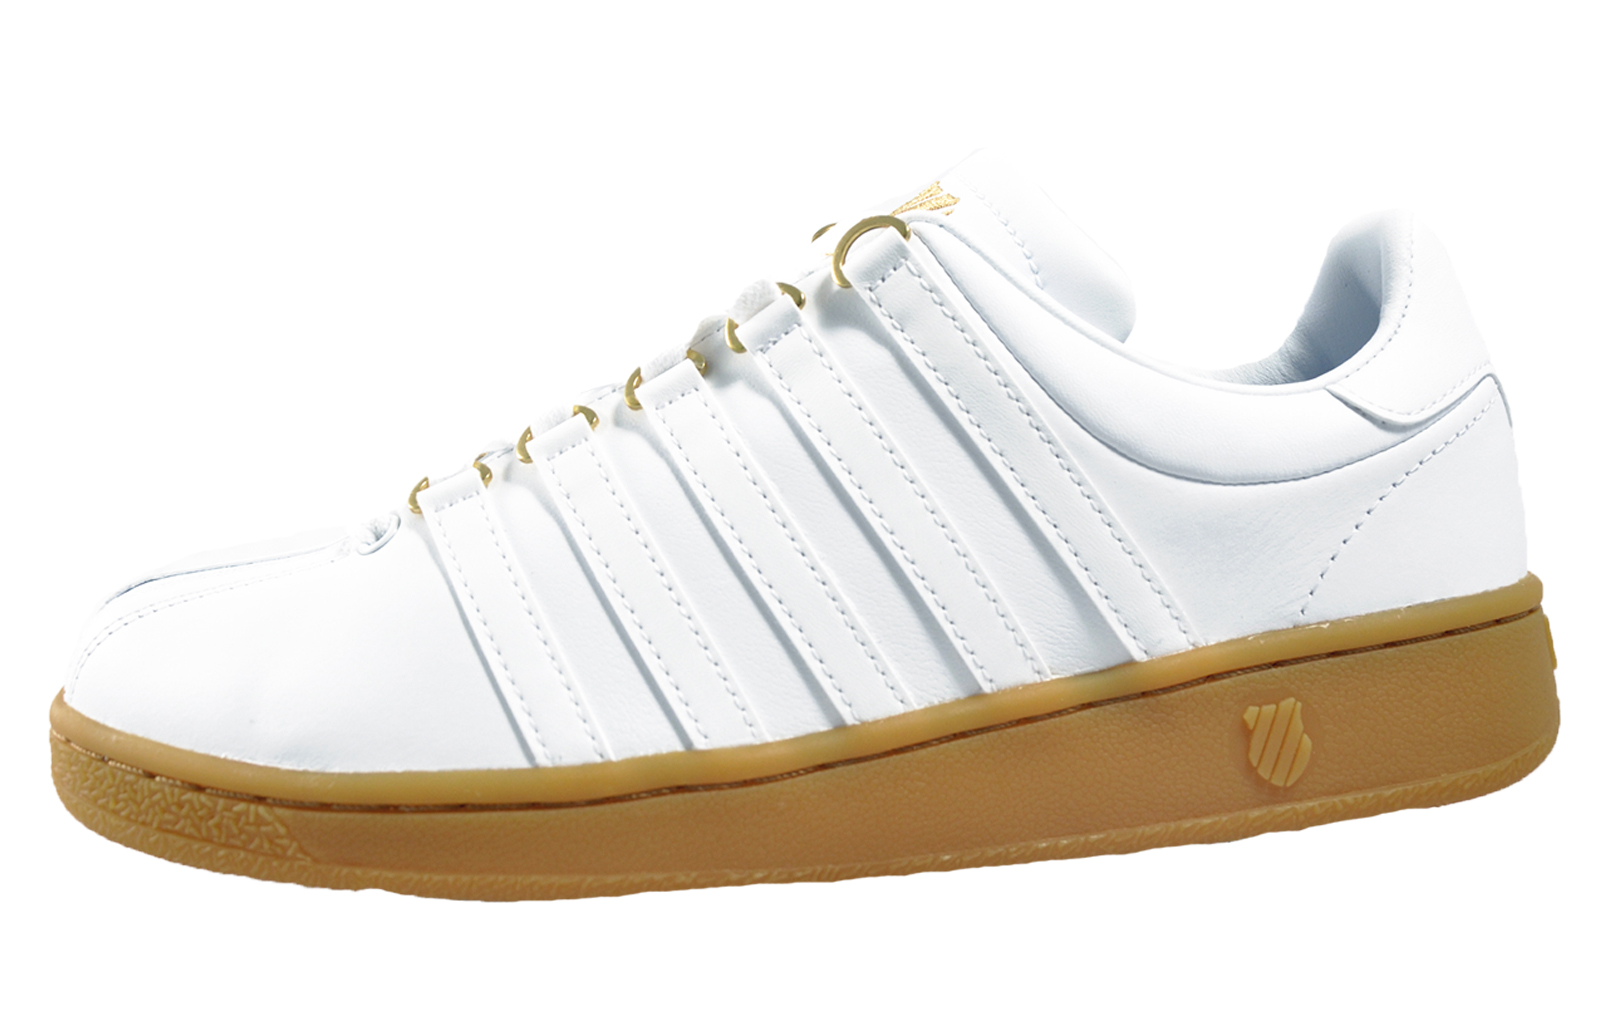 K Swiss Classic VN Vintage Mens White Leather Retro Trainers | eBay